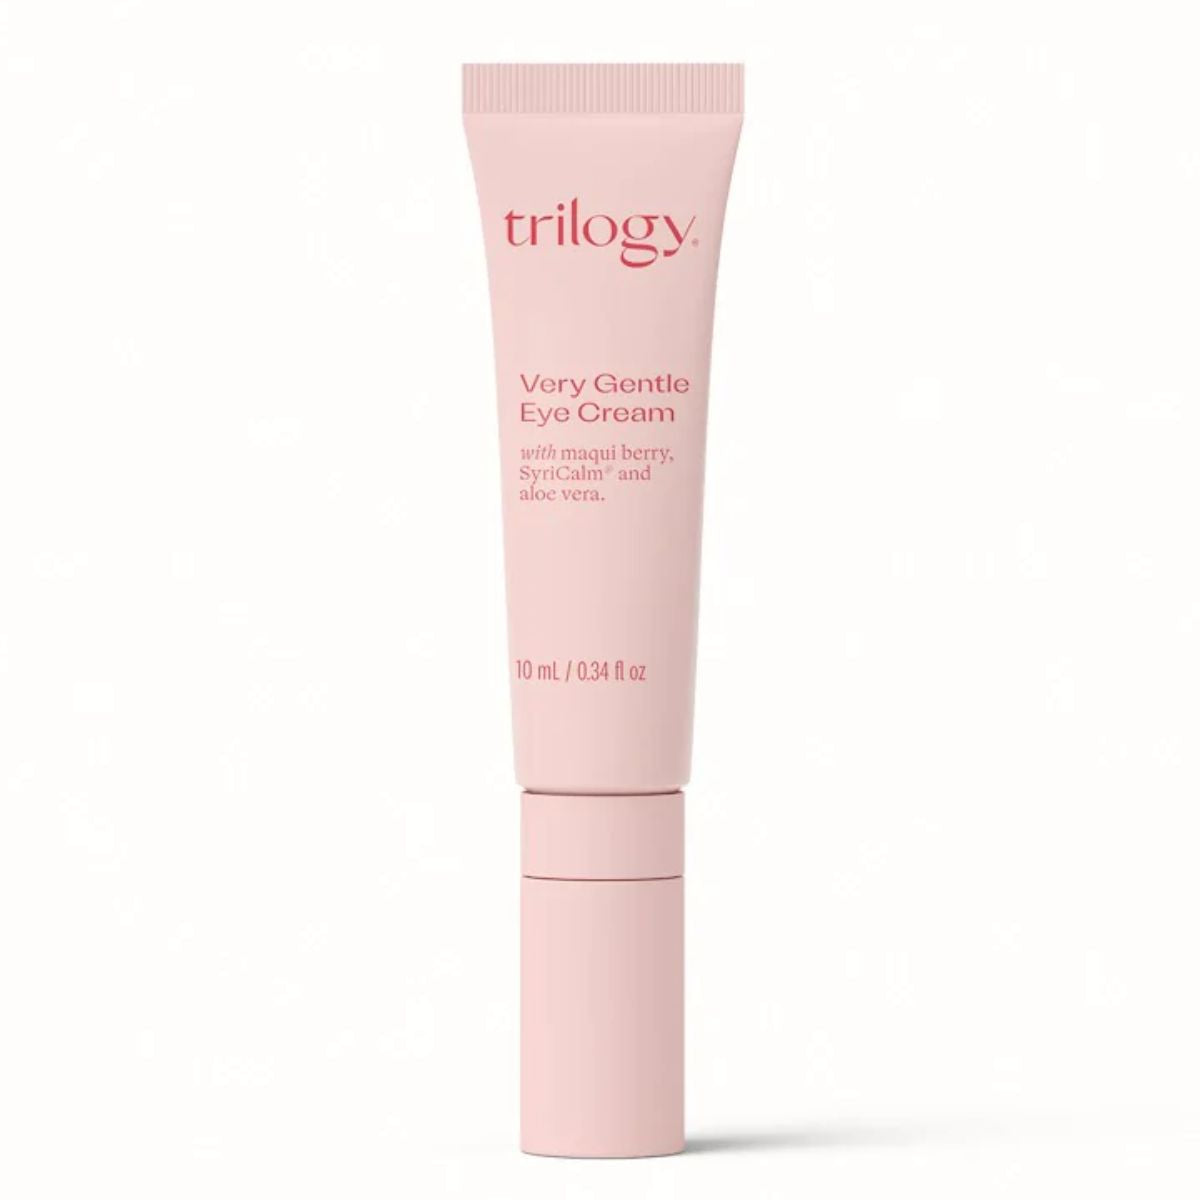 Trilogy Very Gentle Eye Cream for Sensitive and Reactive Skin